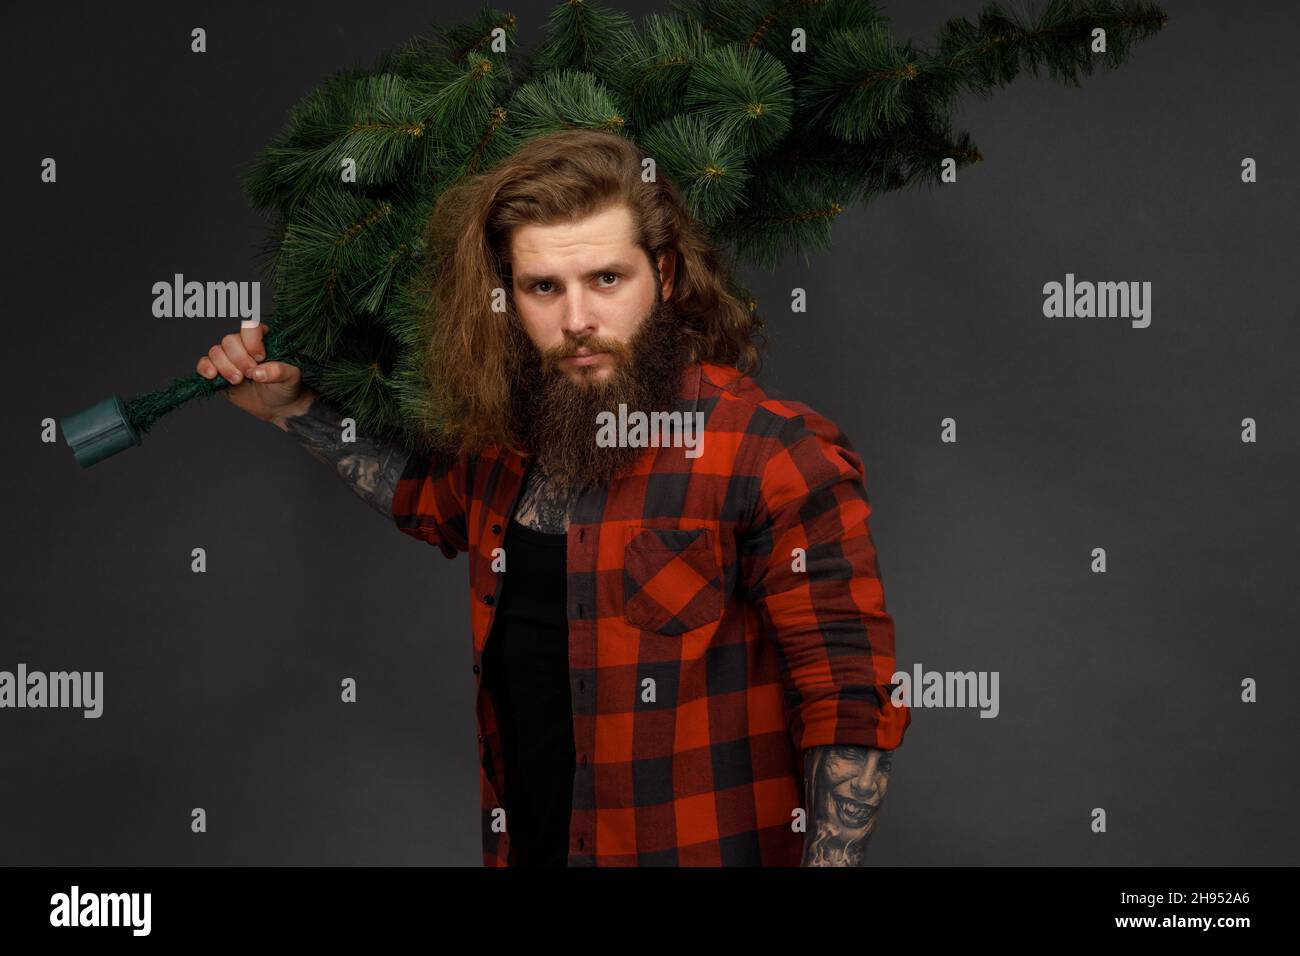 handsome man with long hair holding a synthetic christmas tree. Stock Photo